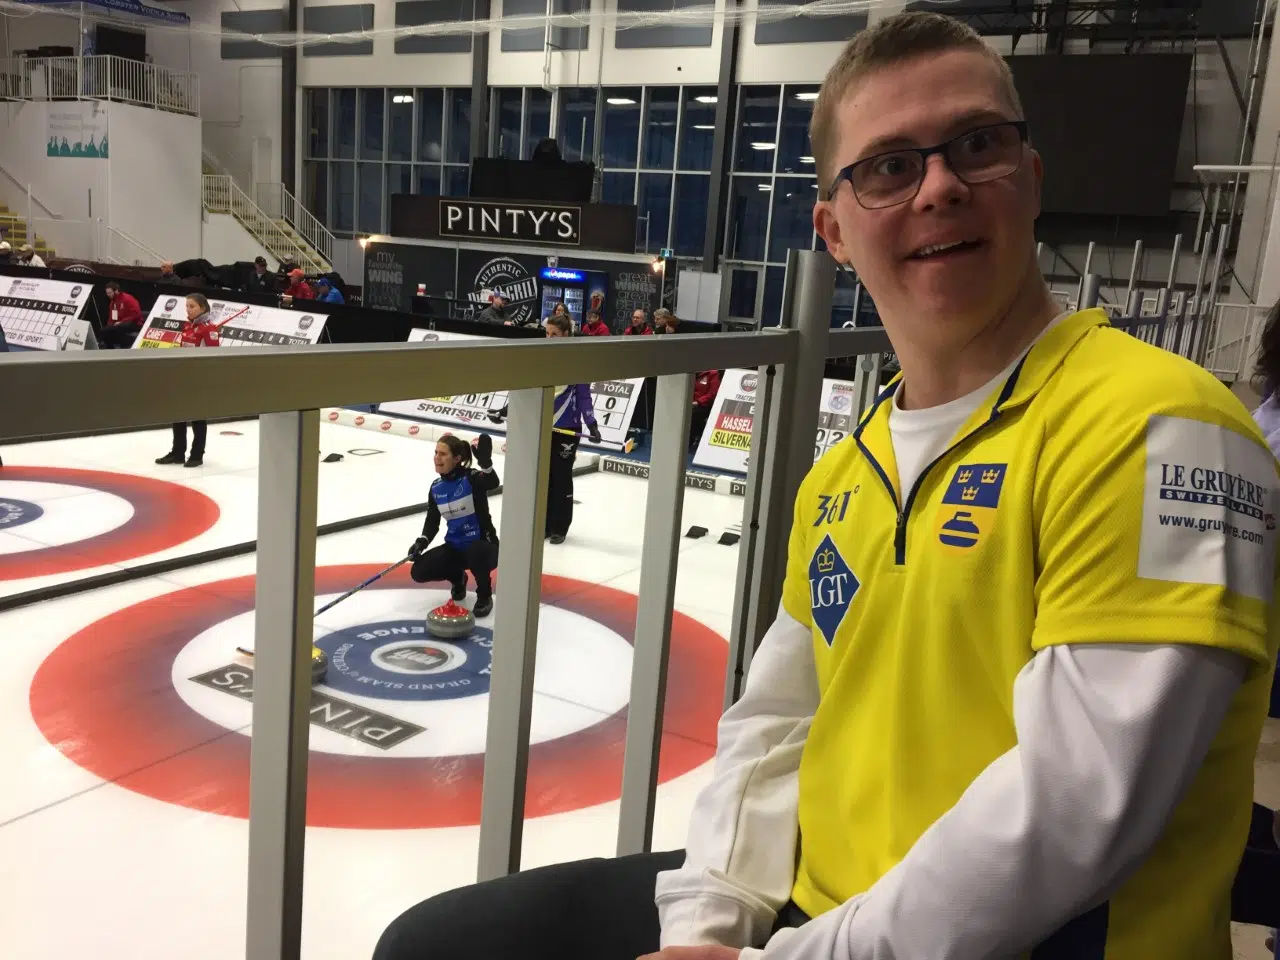 Story Of N.B. Special Olympics Athlete Competing For Curling Day In Canada